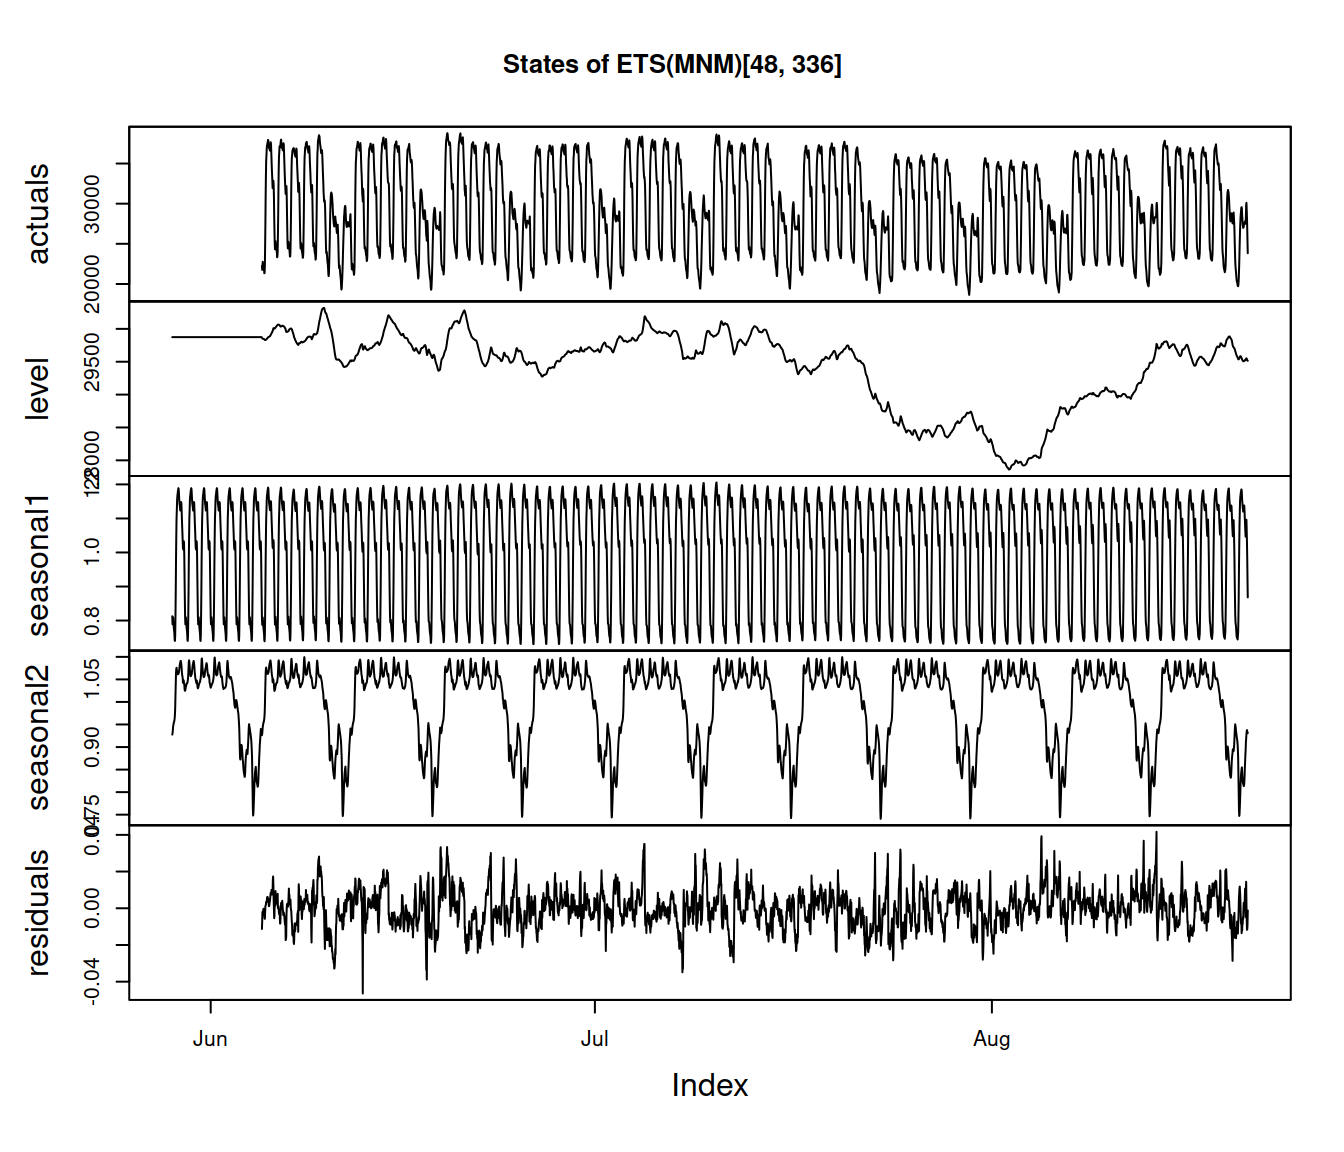 Half-hourly electricity demand data decomposition according to ETS(M,N,M)[48,336] estimated with GTMSE.